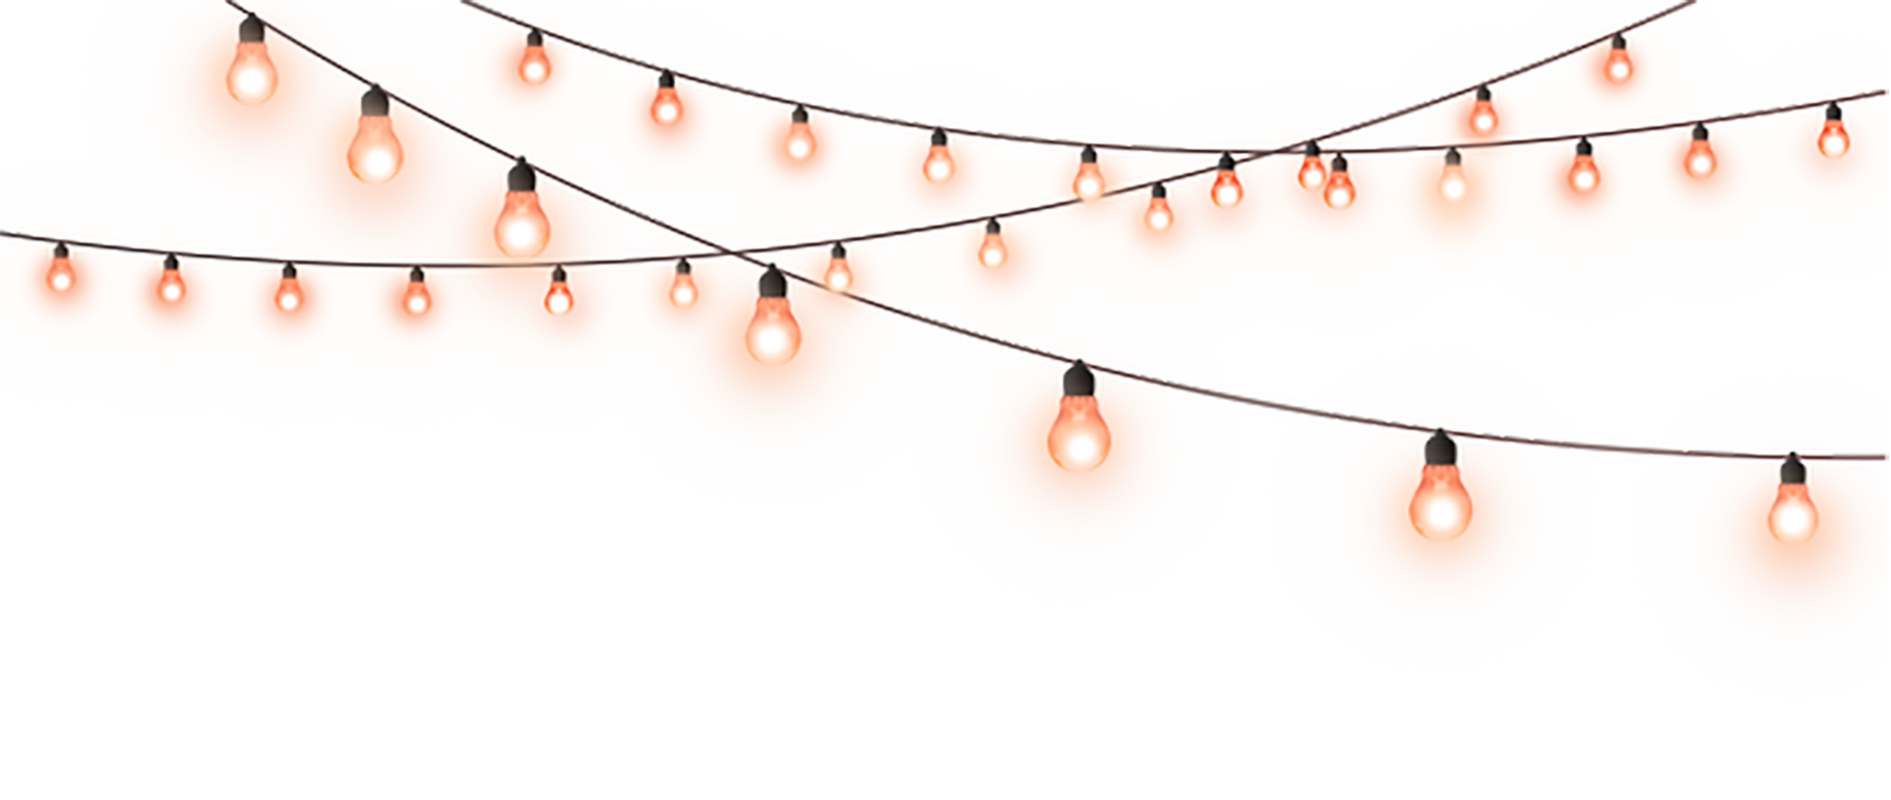 Download Decorative Light Lamp String PNG Free Photo Clipart PNG Free ...